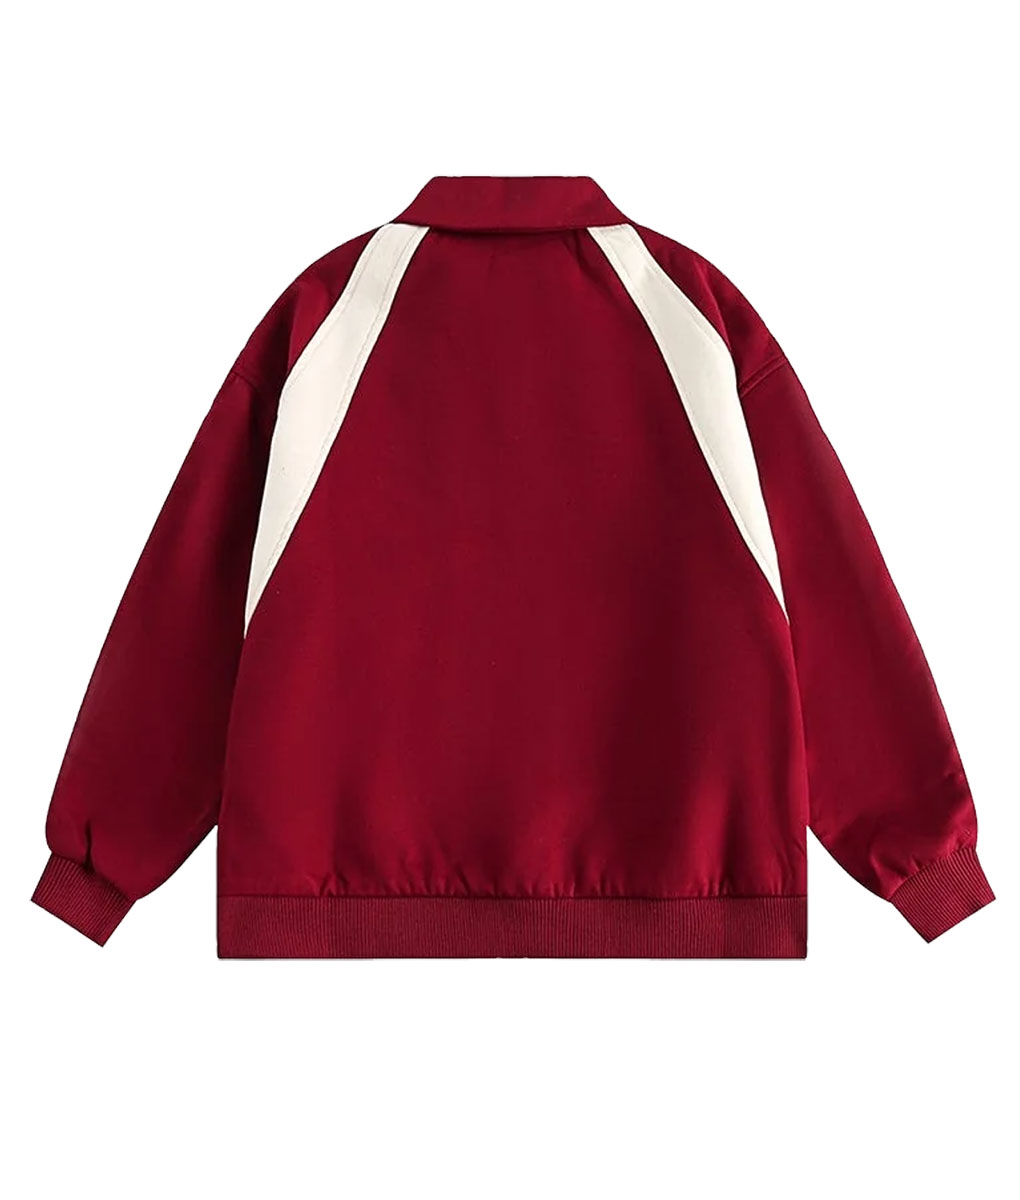 Taylor Swift Red Bomber Jacket (1)